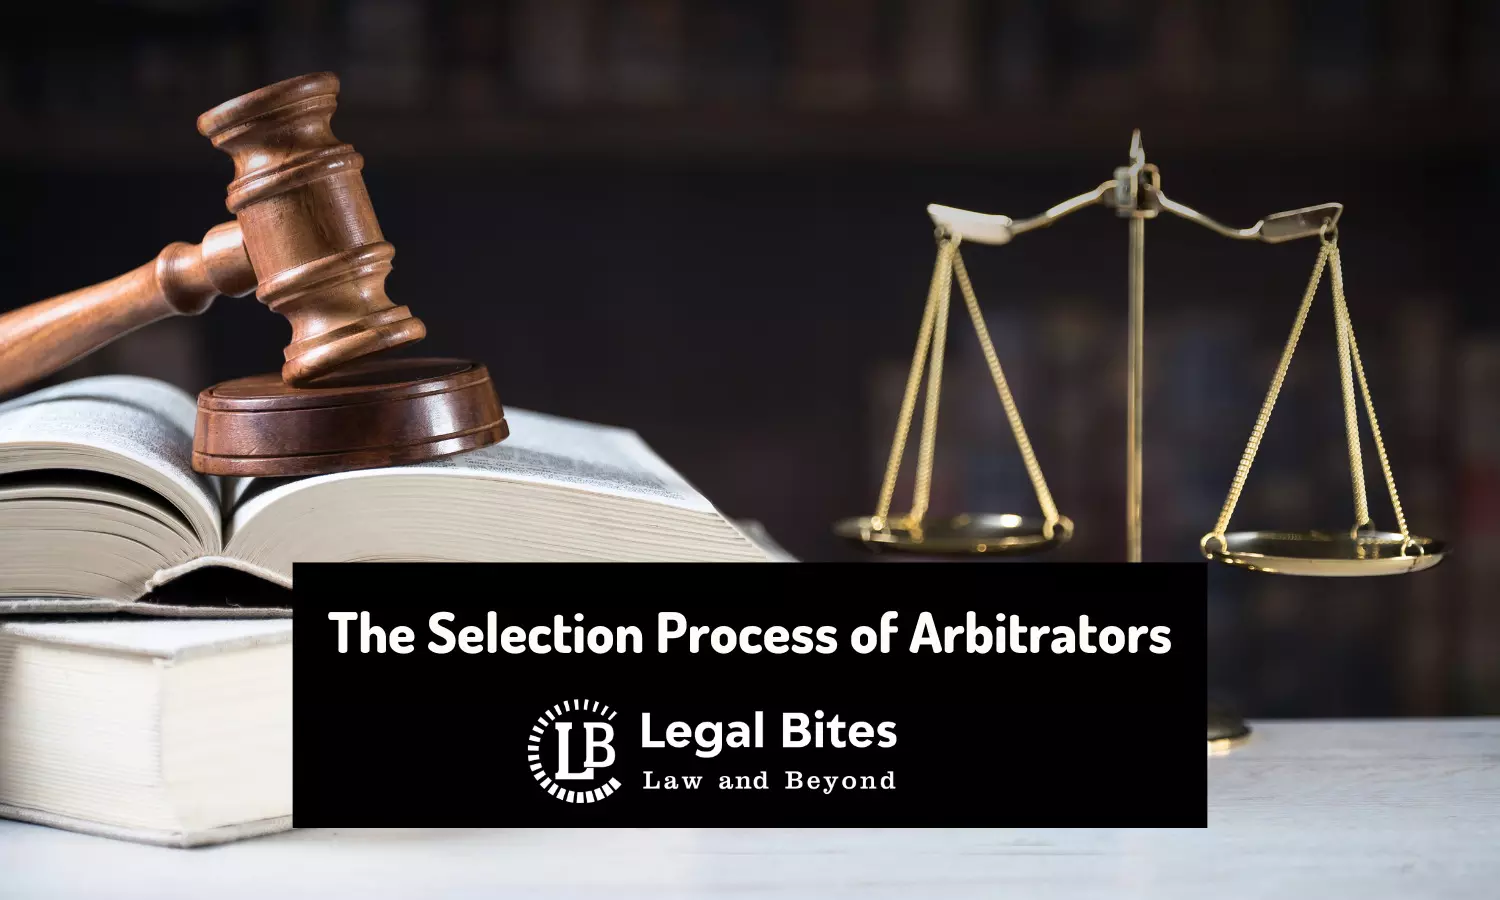 The Selection Process of Arbitrators